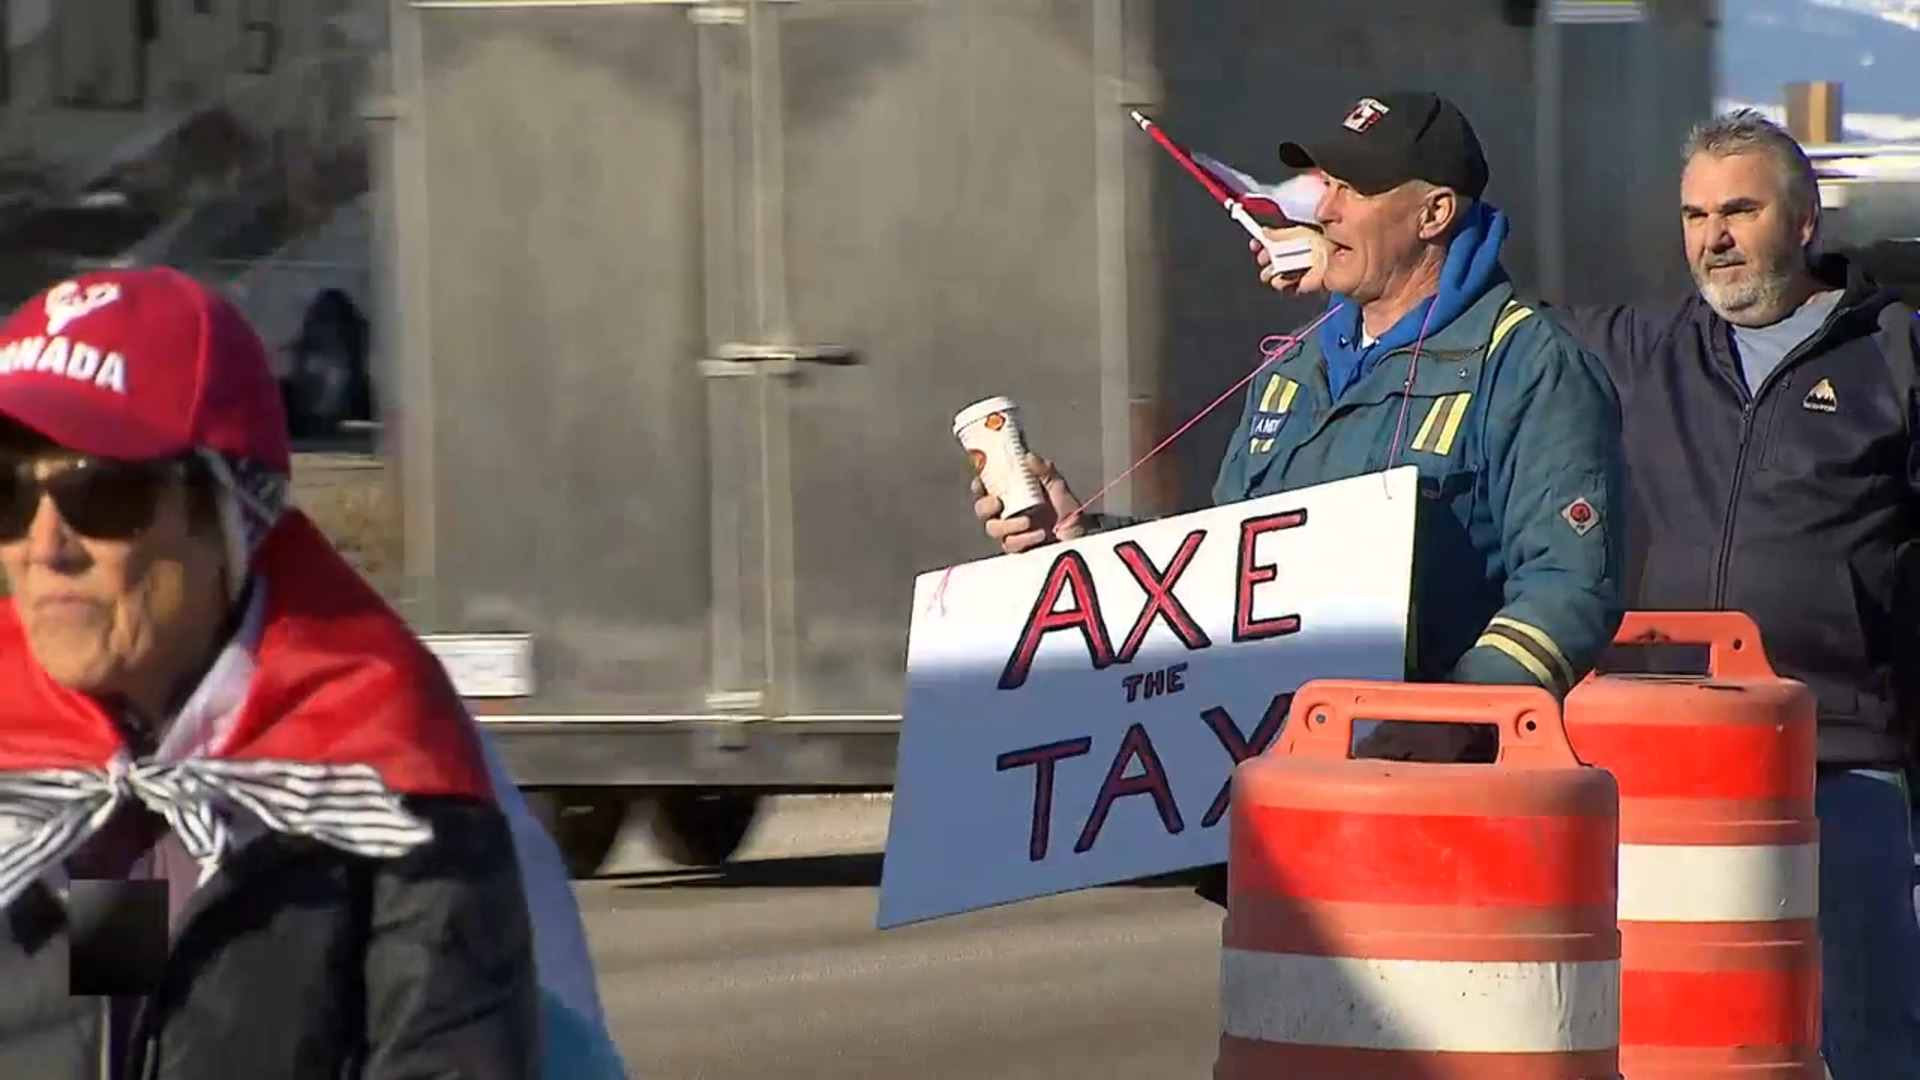 Carbon tax protests happening across Canada